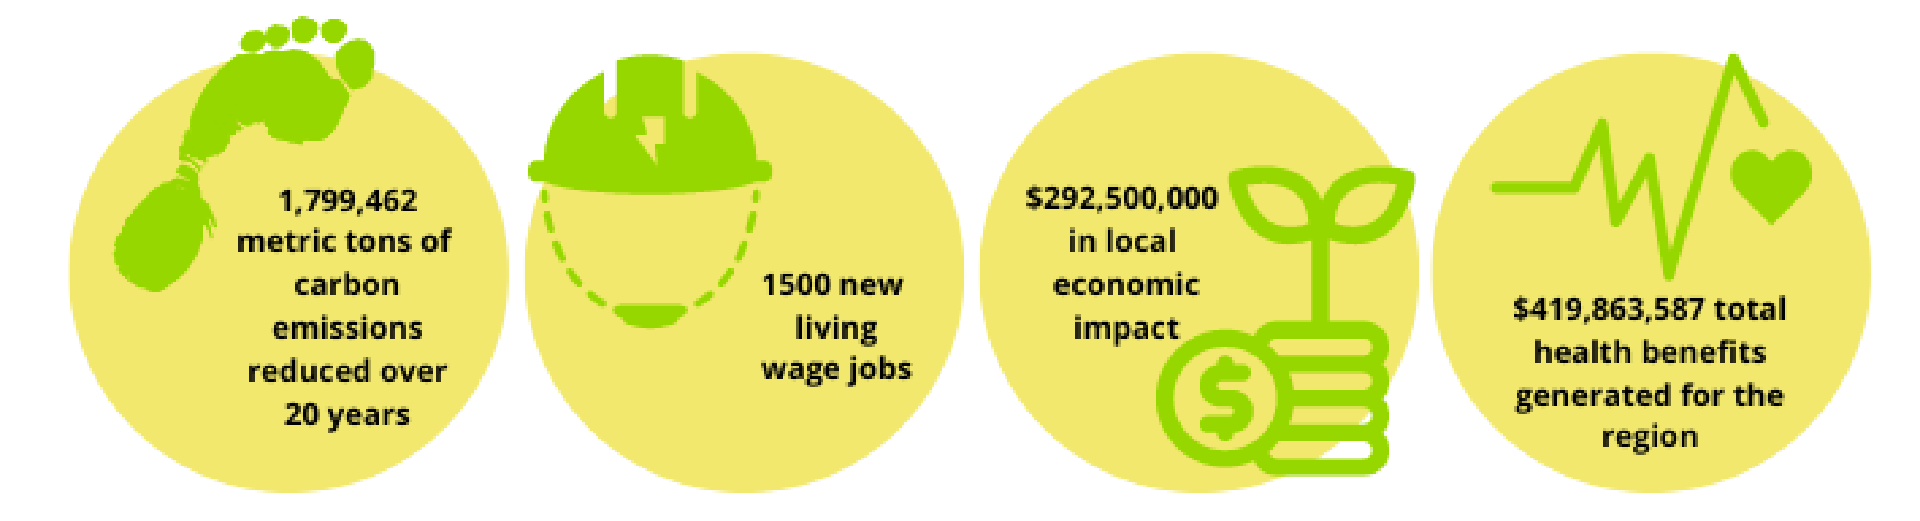 Circles showing: 1,799,462 metric tons of carbon emissions reduced over 20 years. 1,500 new living wage jobs. $292,500,000 in local economic impact. $419,863,587 total health benefits generated for the region.